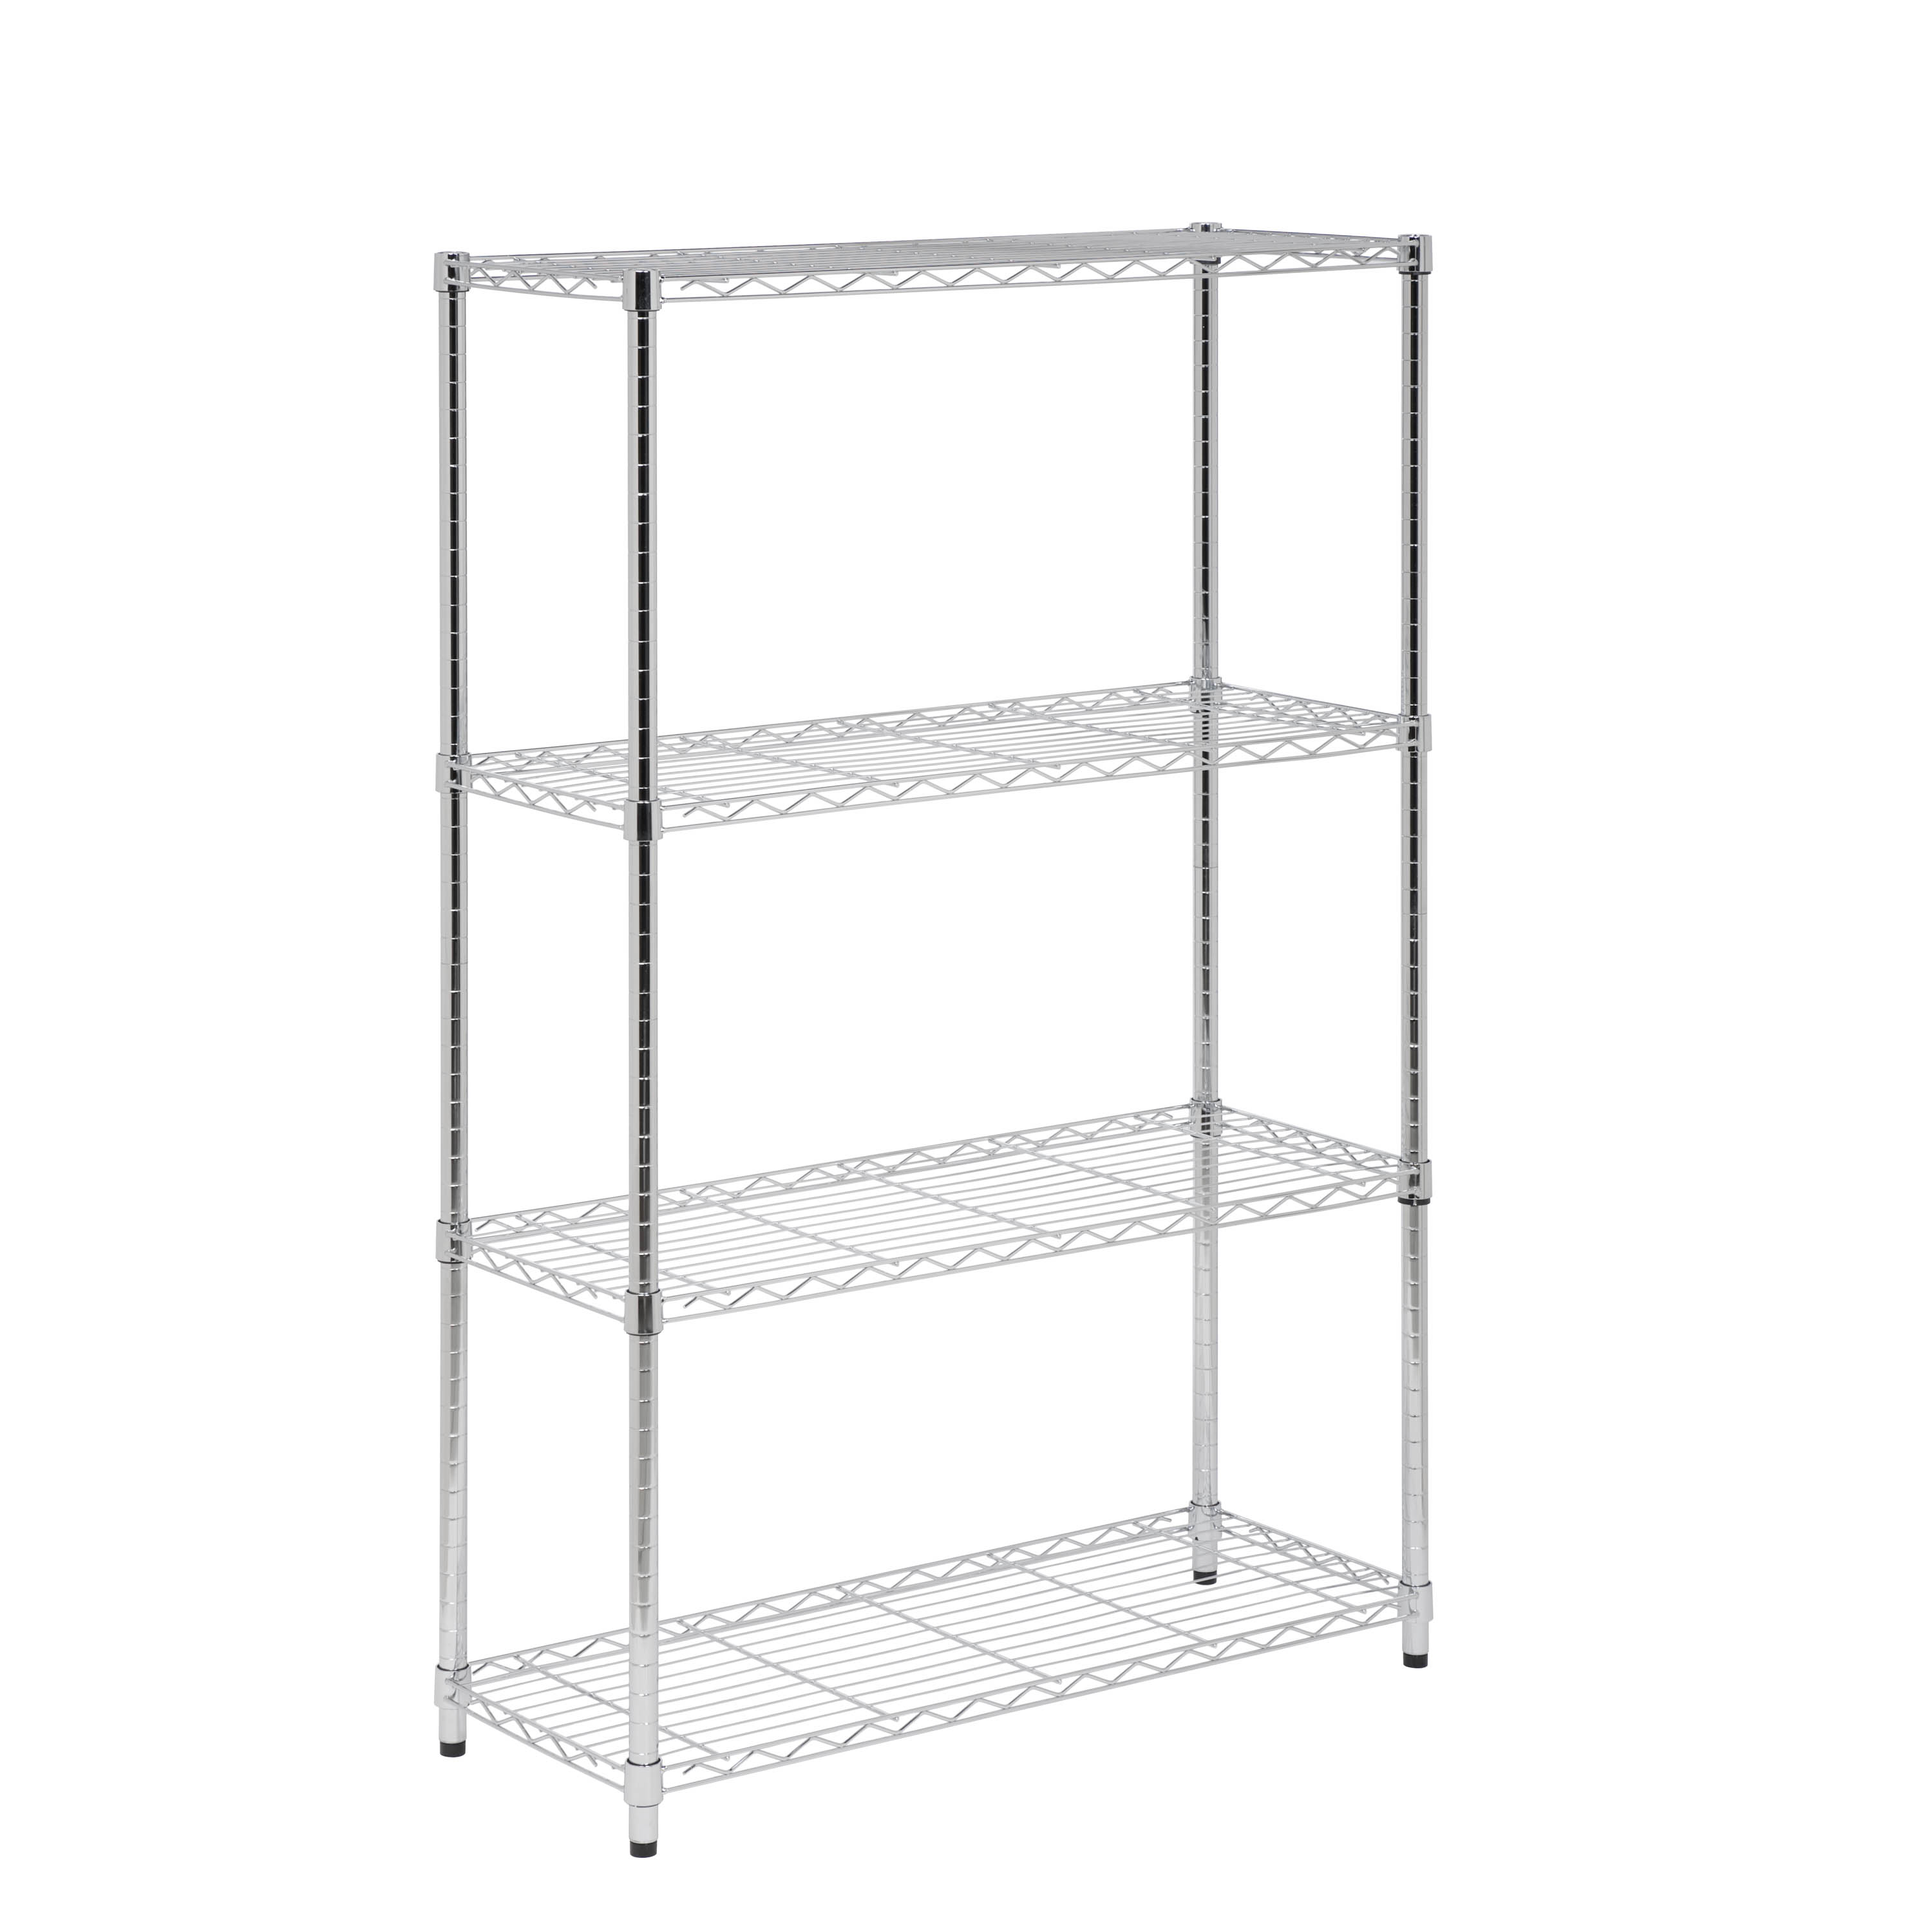 Honey Can Do 4-Tier Heavy-Duty Adjustable Shelving Unit With 250-Lb Weight Capacity, Chrome, Basement/Garage - image 1 of 5